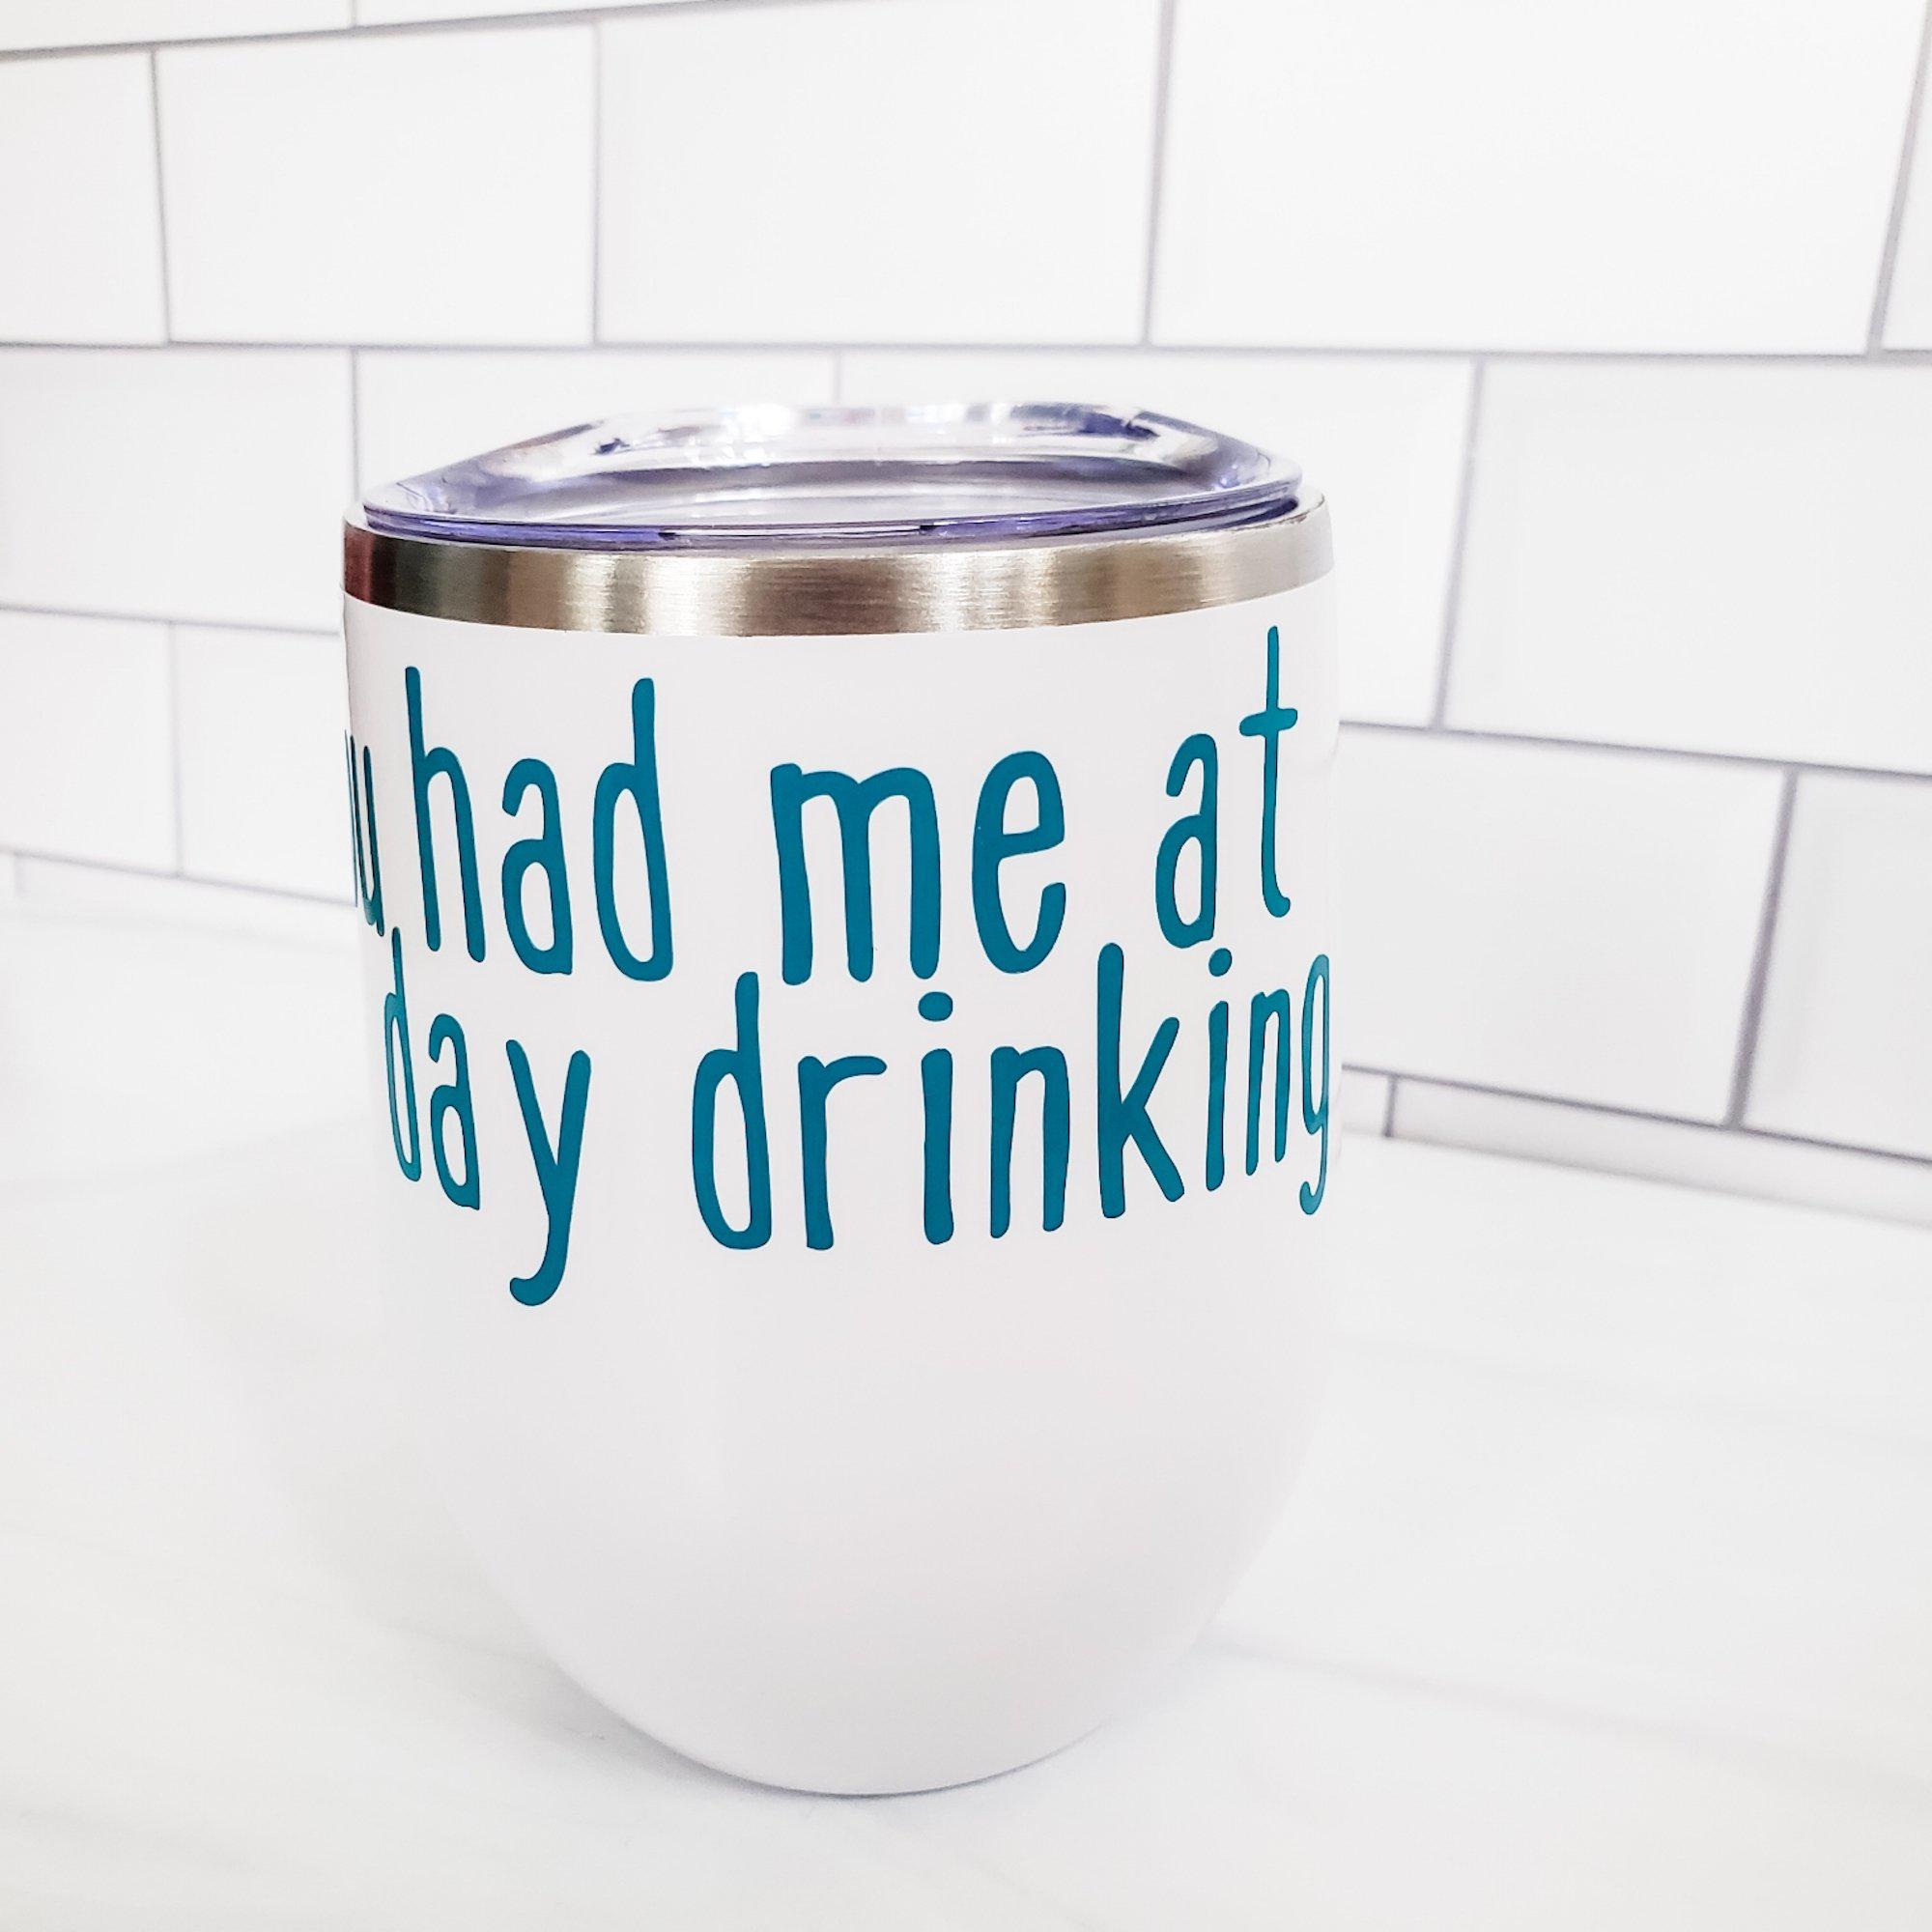 You Had Me At Day Drinking Wine Tumbler Salt and Sparkle